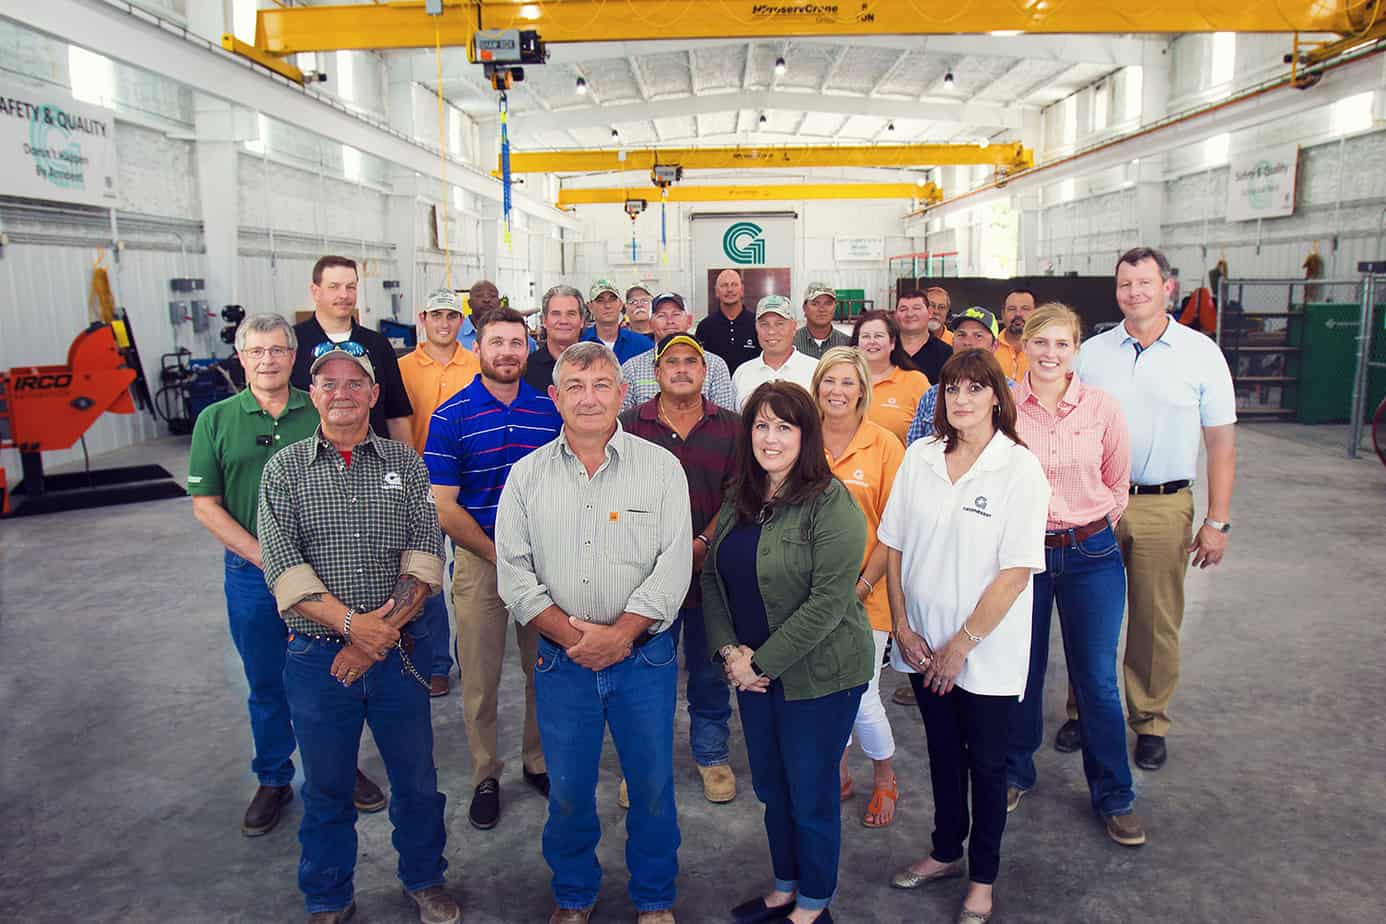 Greenberry is excited to open our new fabrication shop in Sulphur, La. Meet the pipe fabrication shop team!